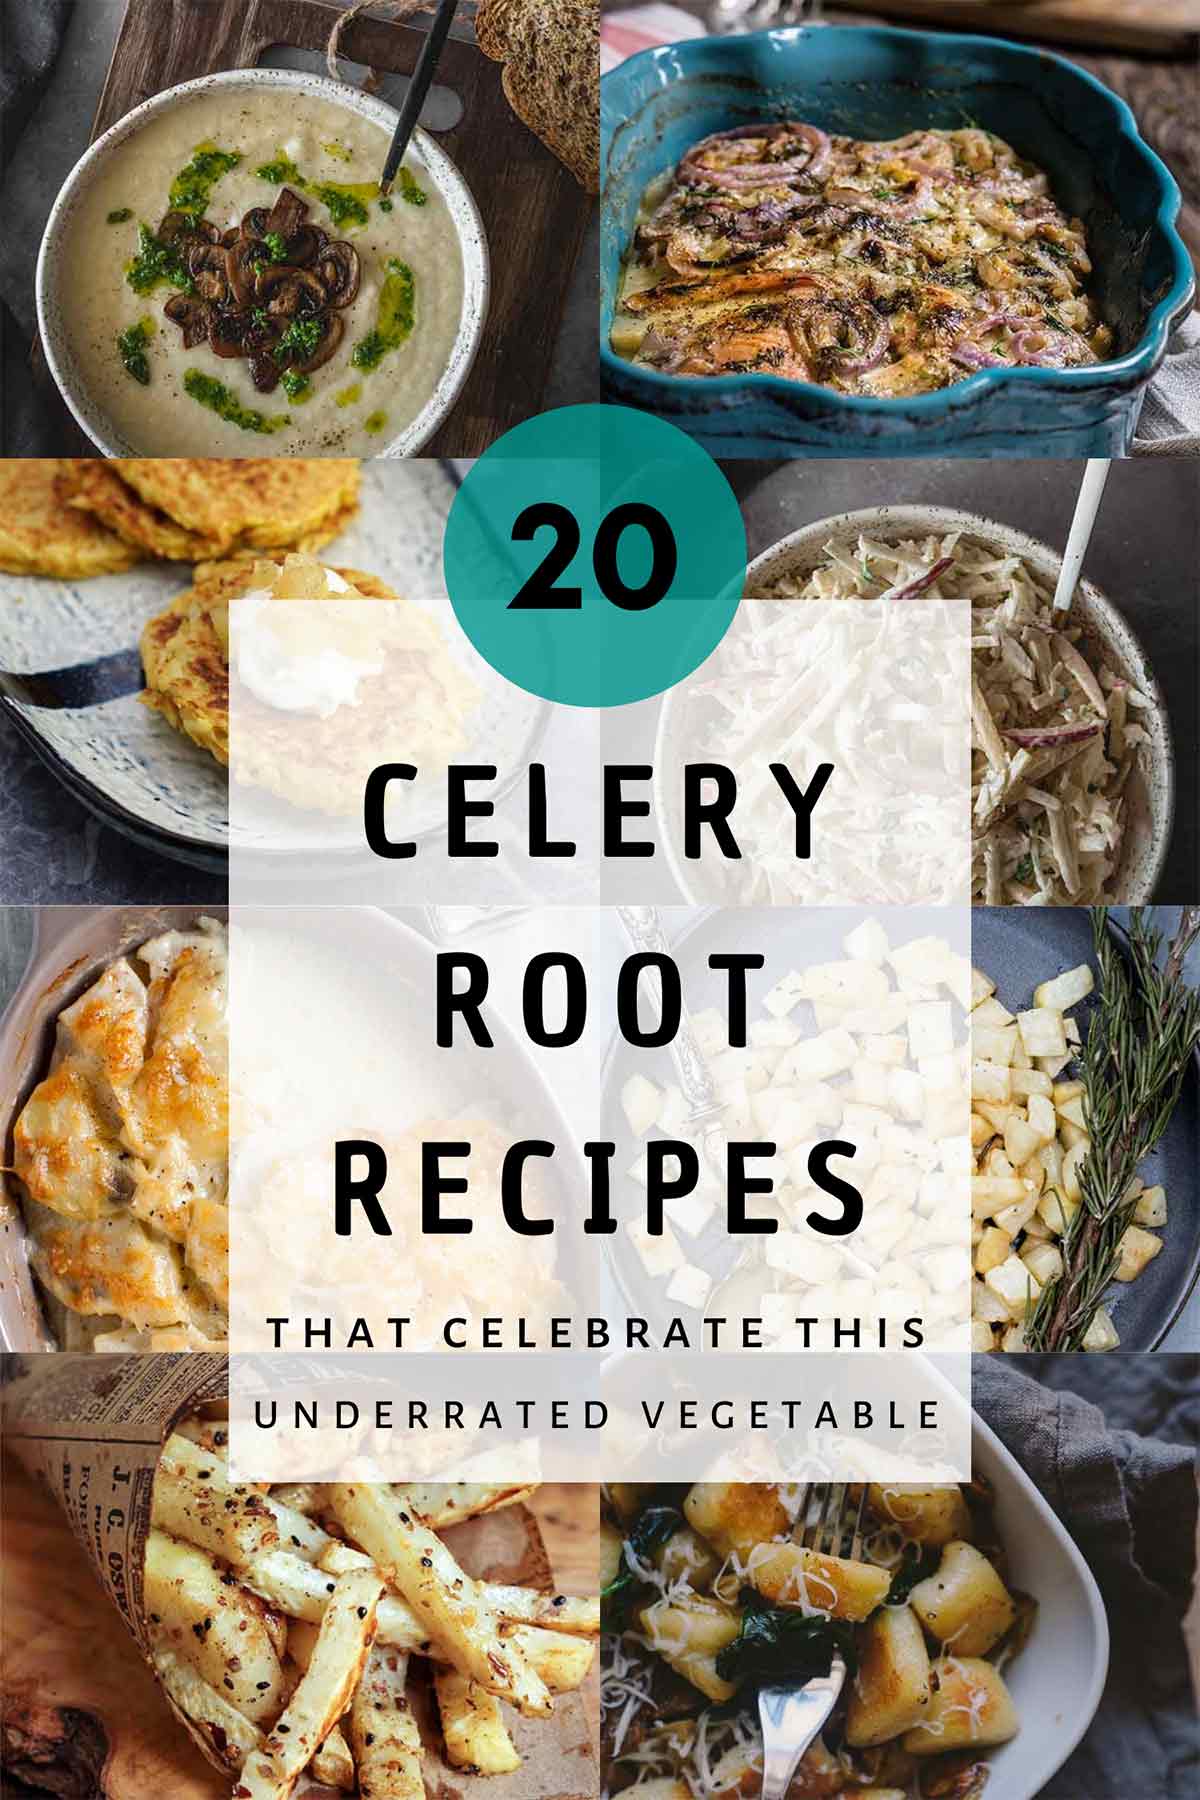 Celery root recipes featured image